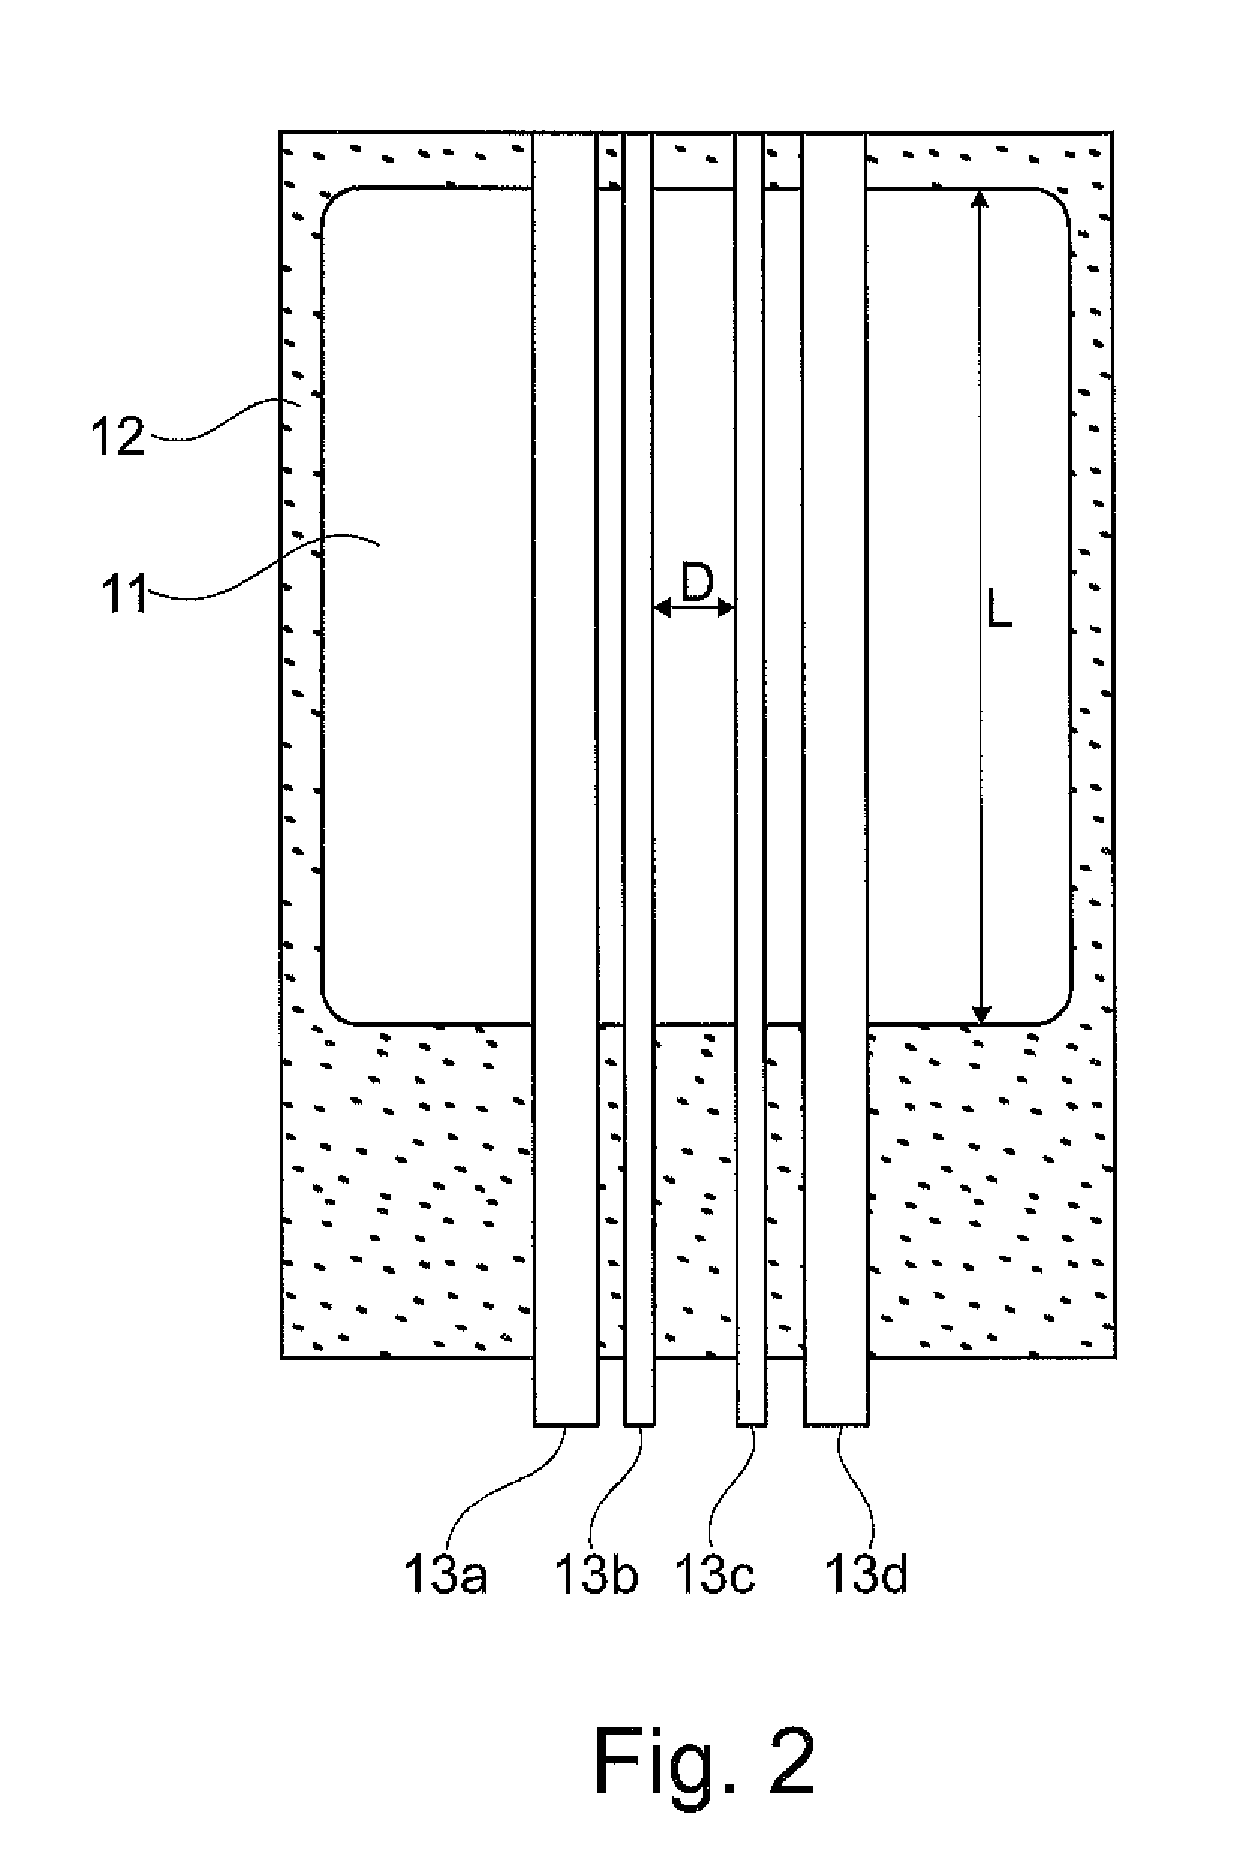 Method of manufacturing thermoelectric module using ink formulations